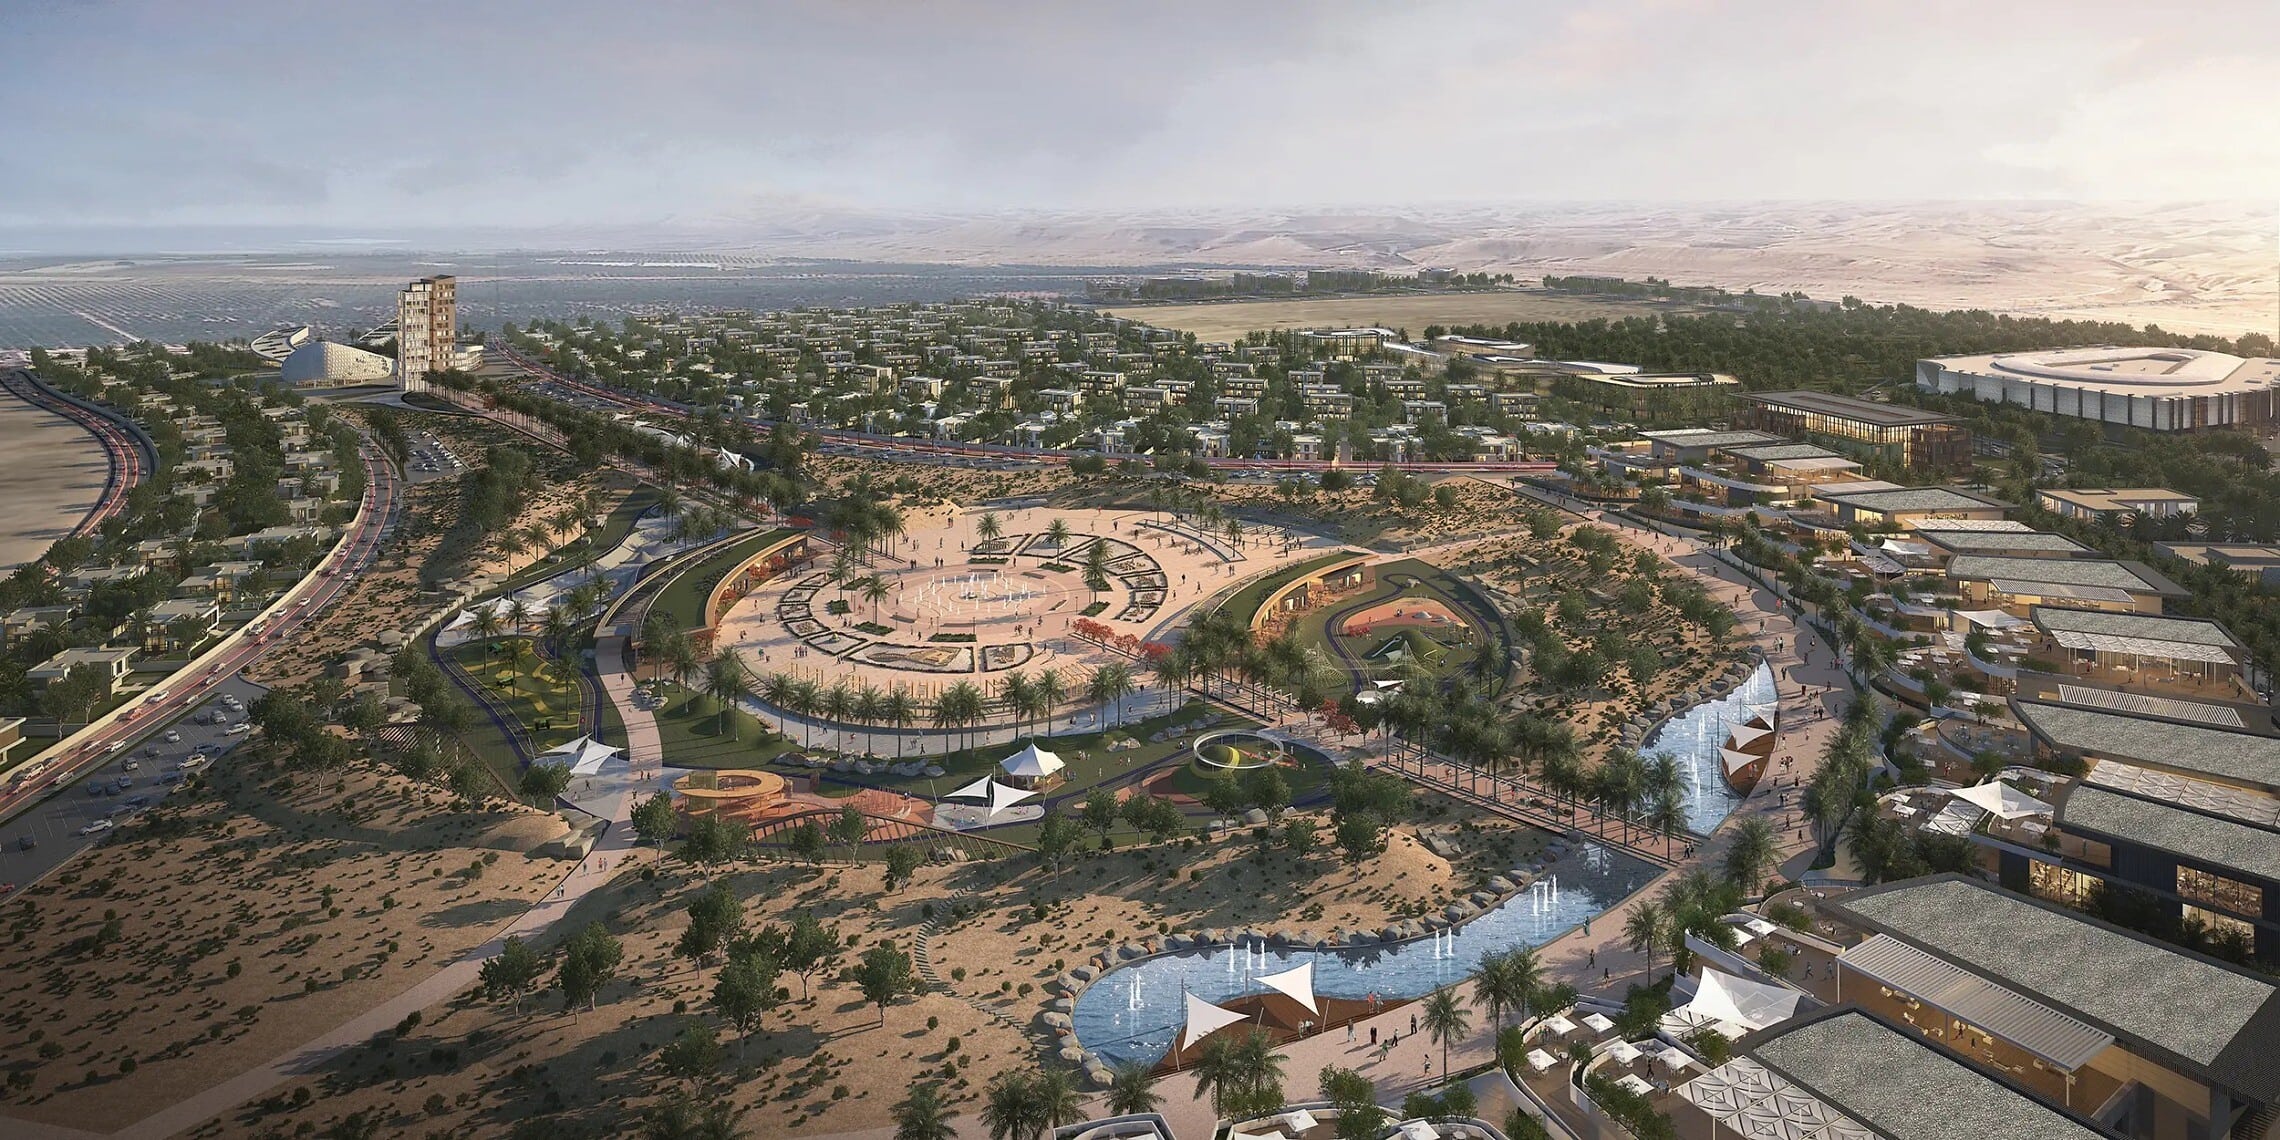 A rendering of the Jericho Gate neighborhood in Jericho, West Bank. (Courtesy: SP Architects)